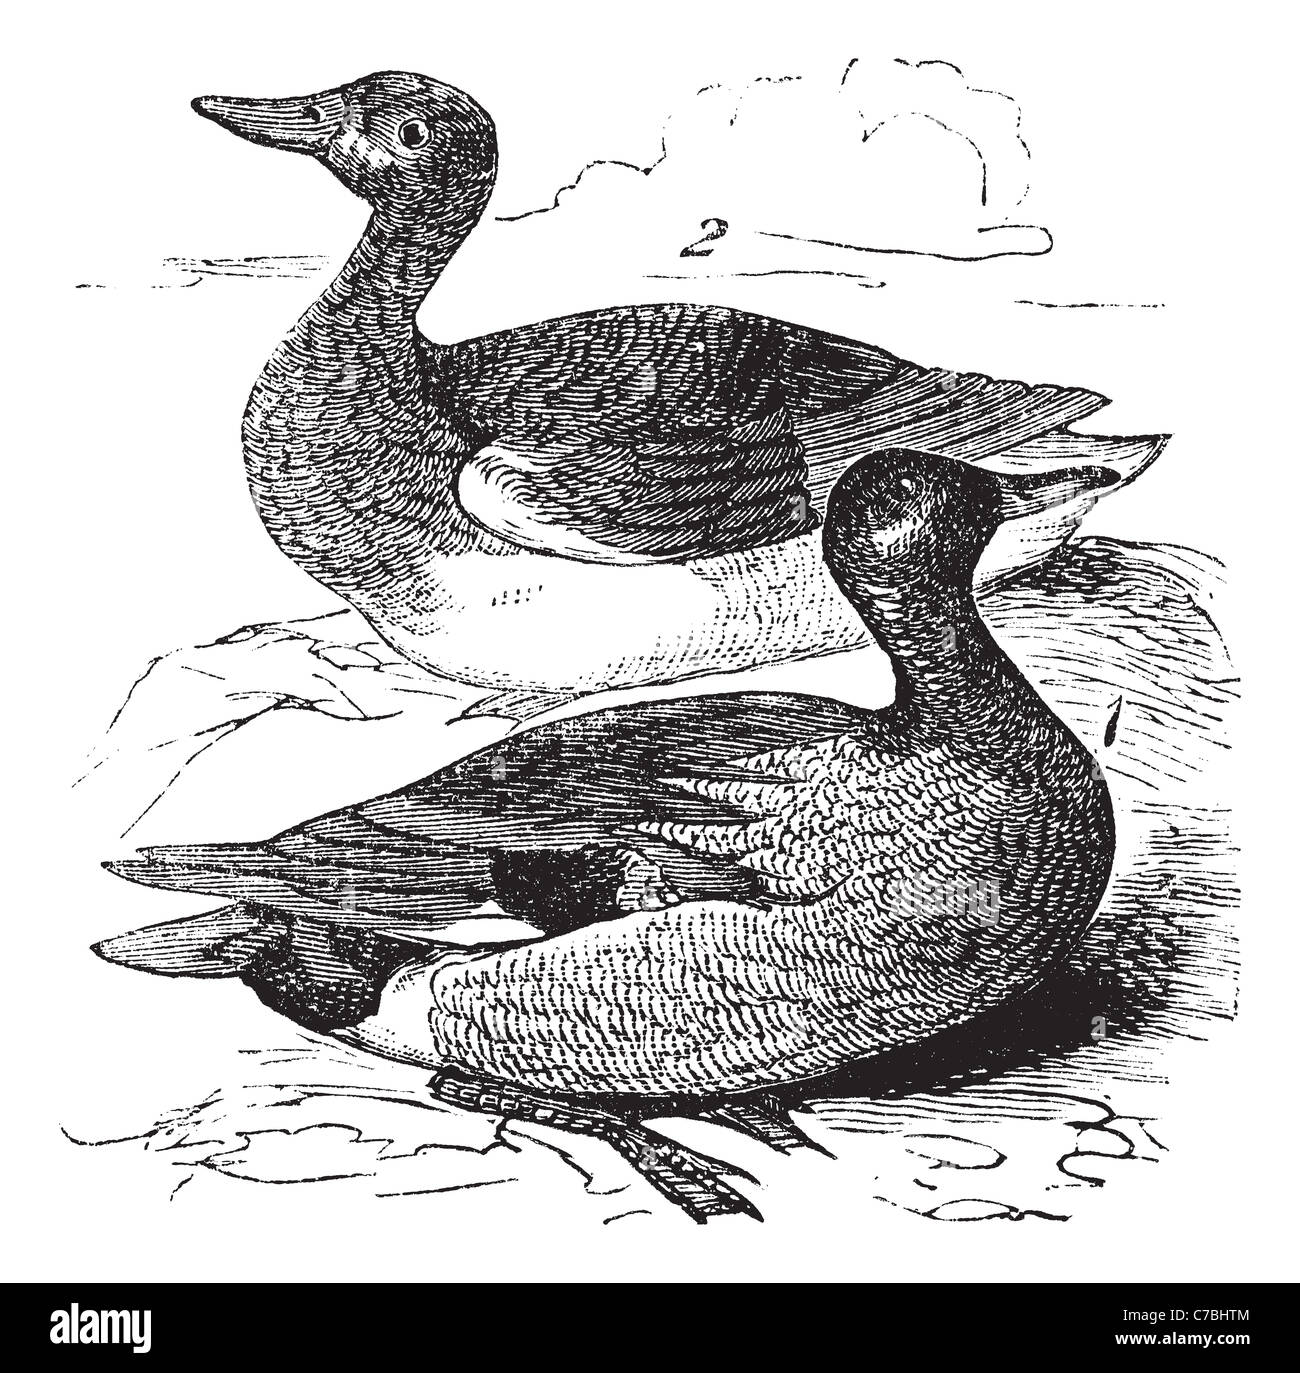 Gadwall or Anas strepera, vintage engraving. Old engraved illustration of male (1) and female (2) Gadwall in a pond. Stock Photo